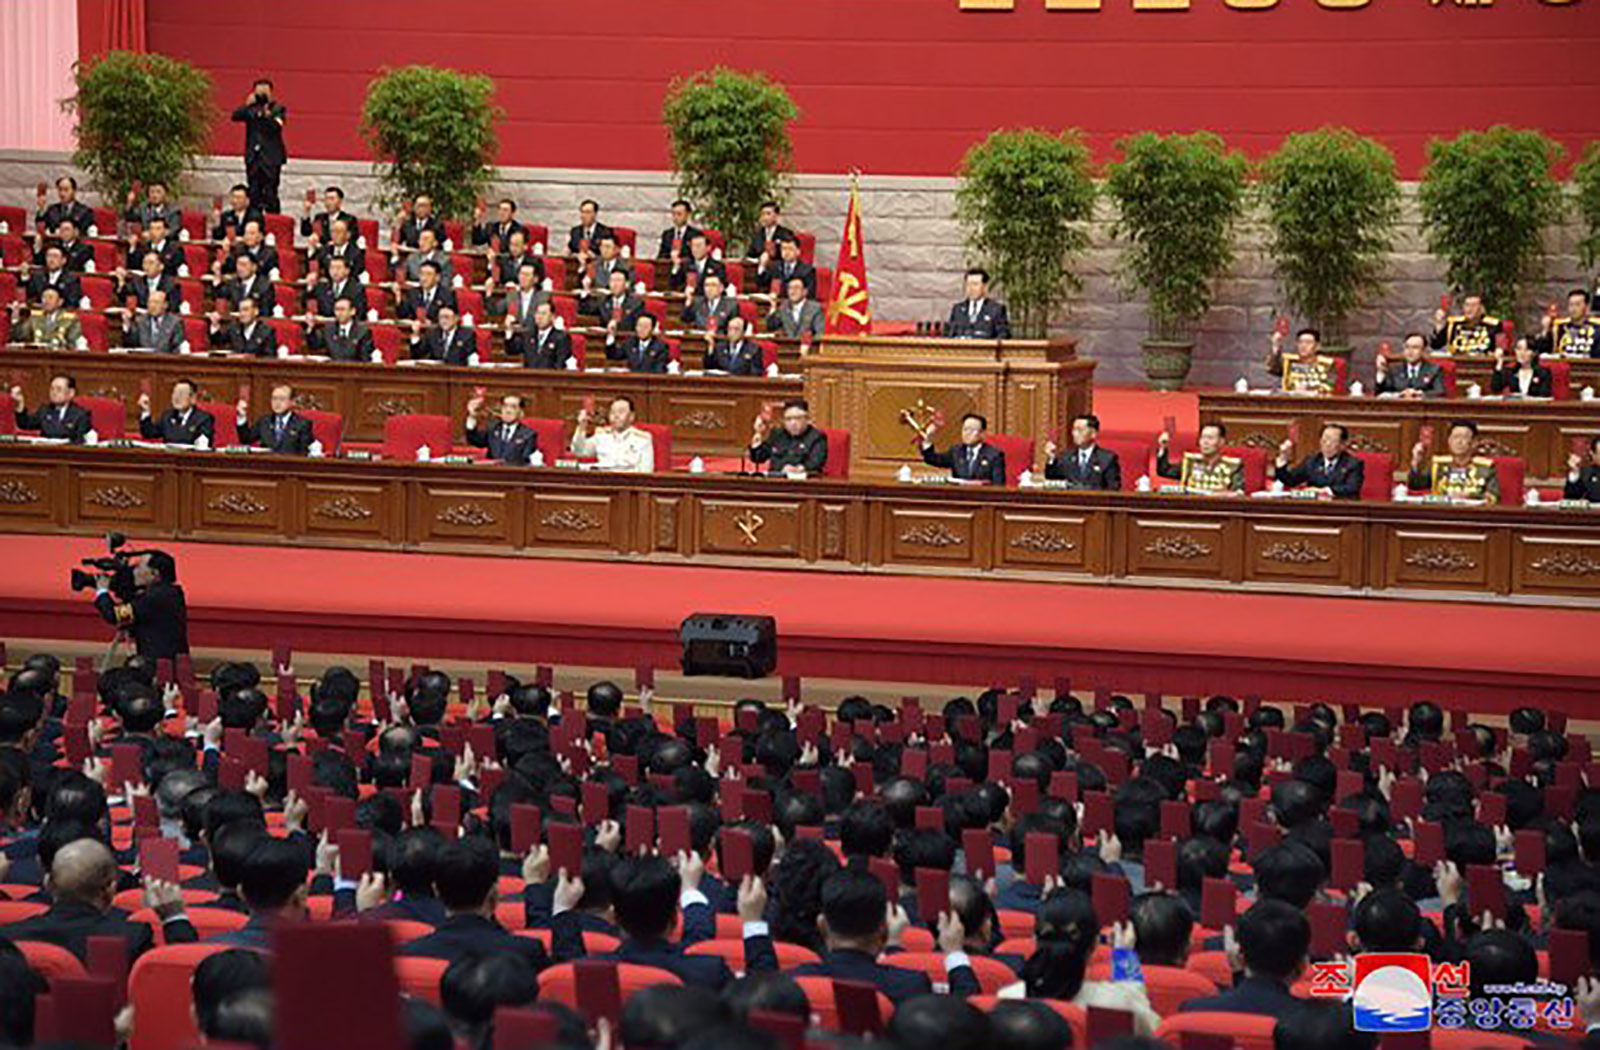 North Korean leader Kim Jong Un addressed the opening session of its 8th Workers’ Party Congress on Tuesday morning, according to the state-run Korean Central News Agency. 